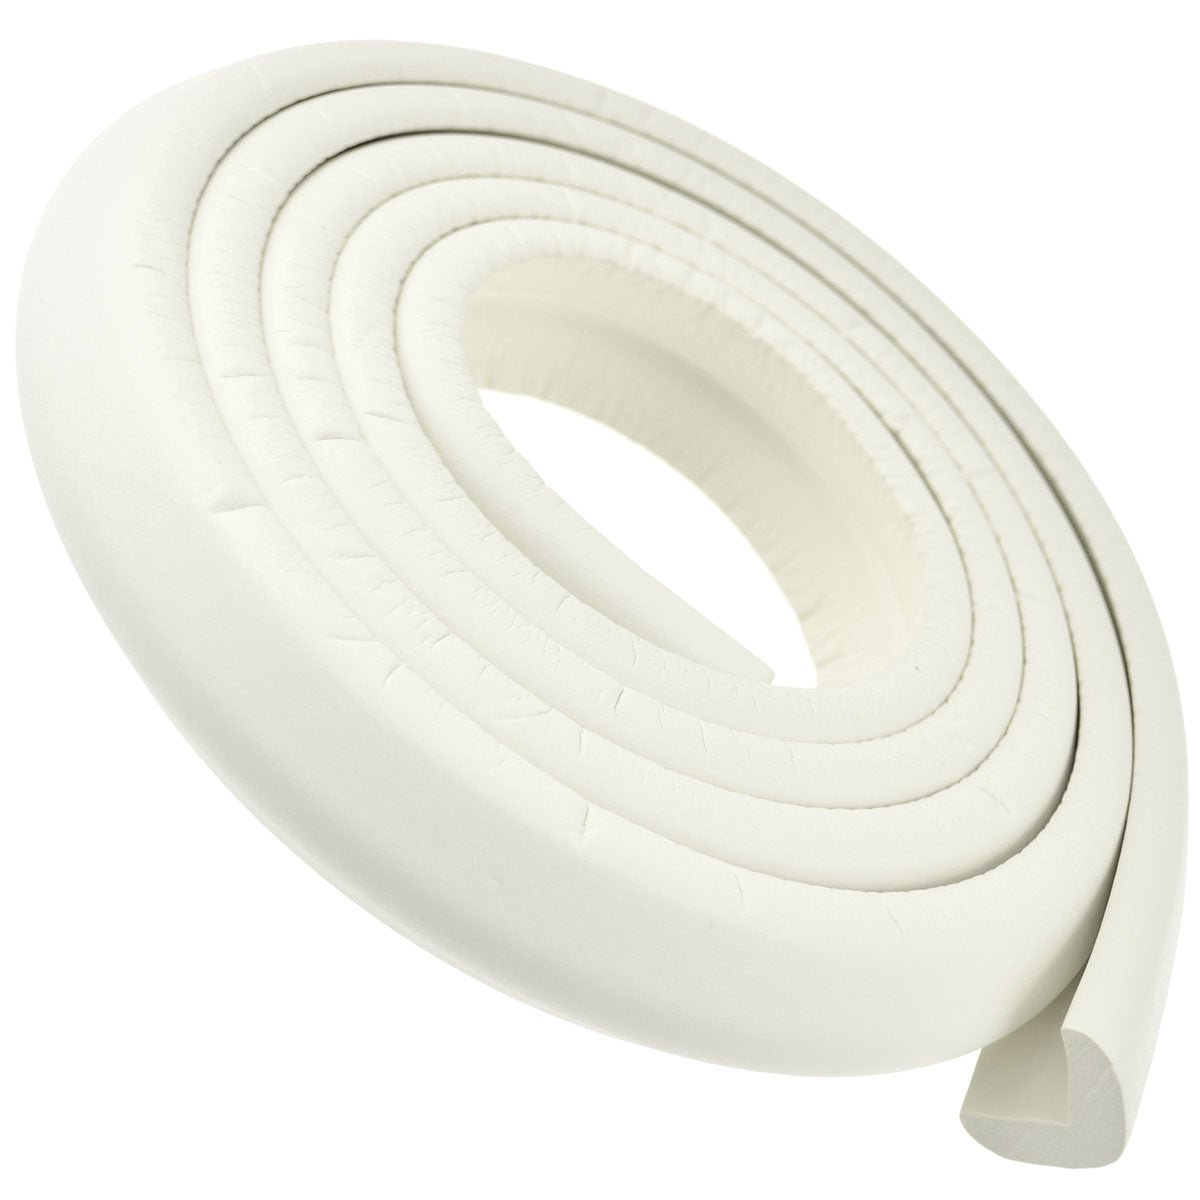 1 Roll Cream White Standard L-Shaped Foam Edge Protector 78.7 inches (2 meters)